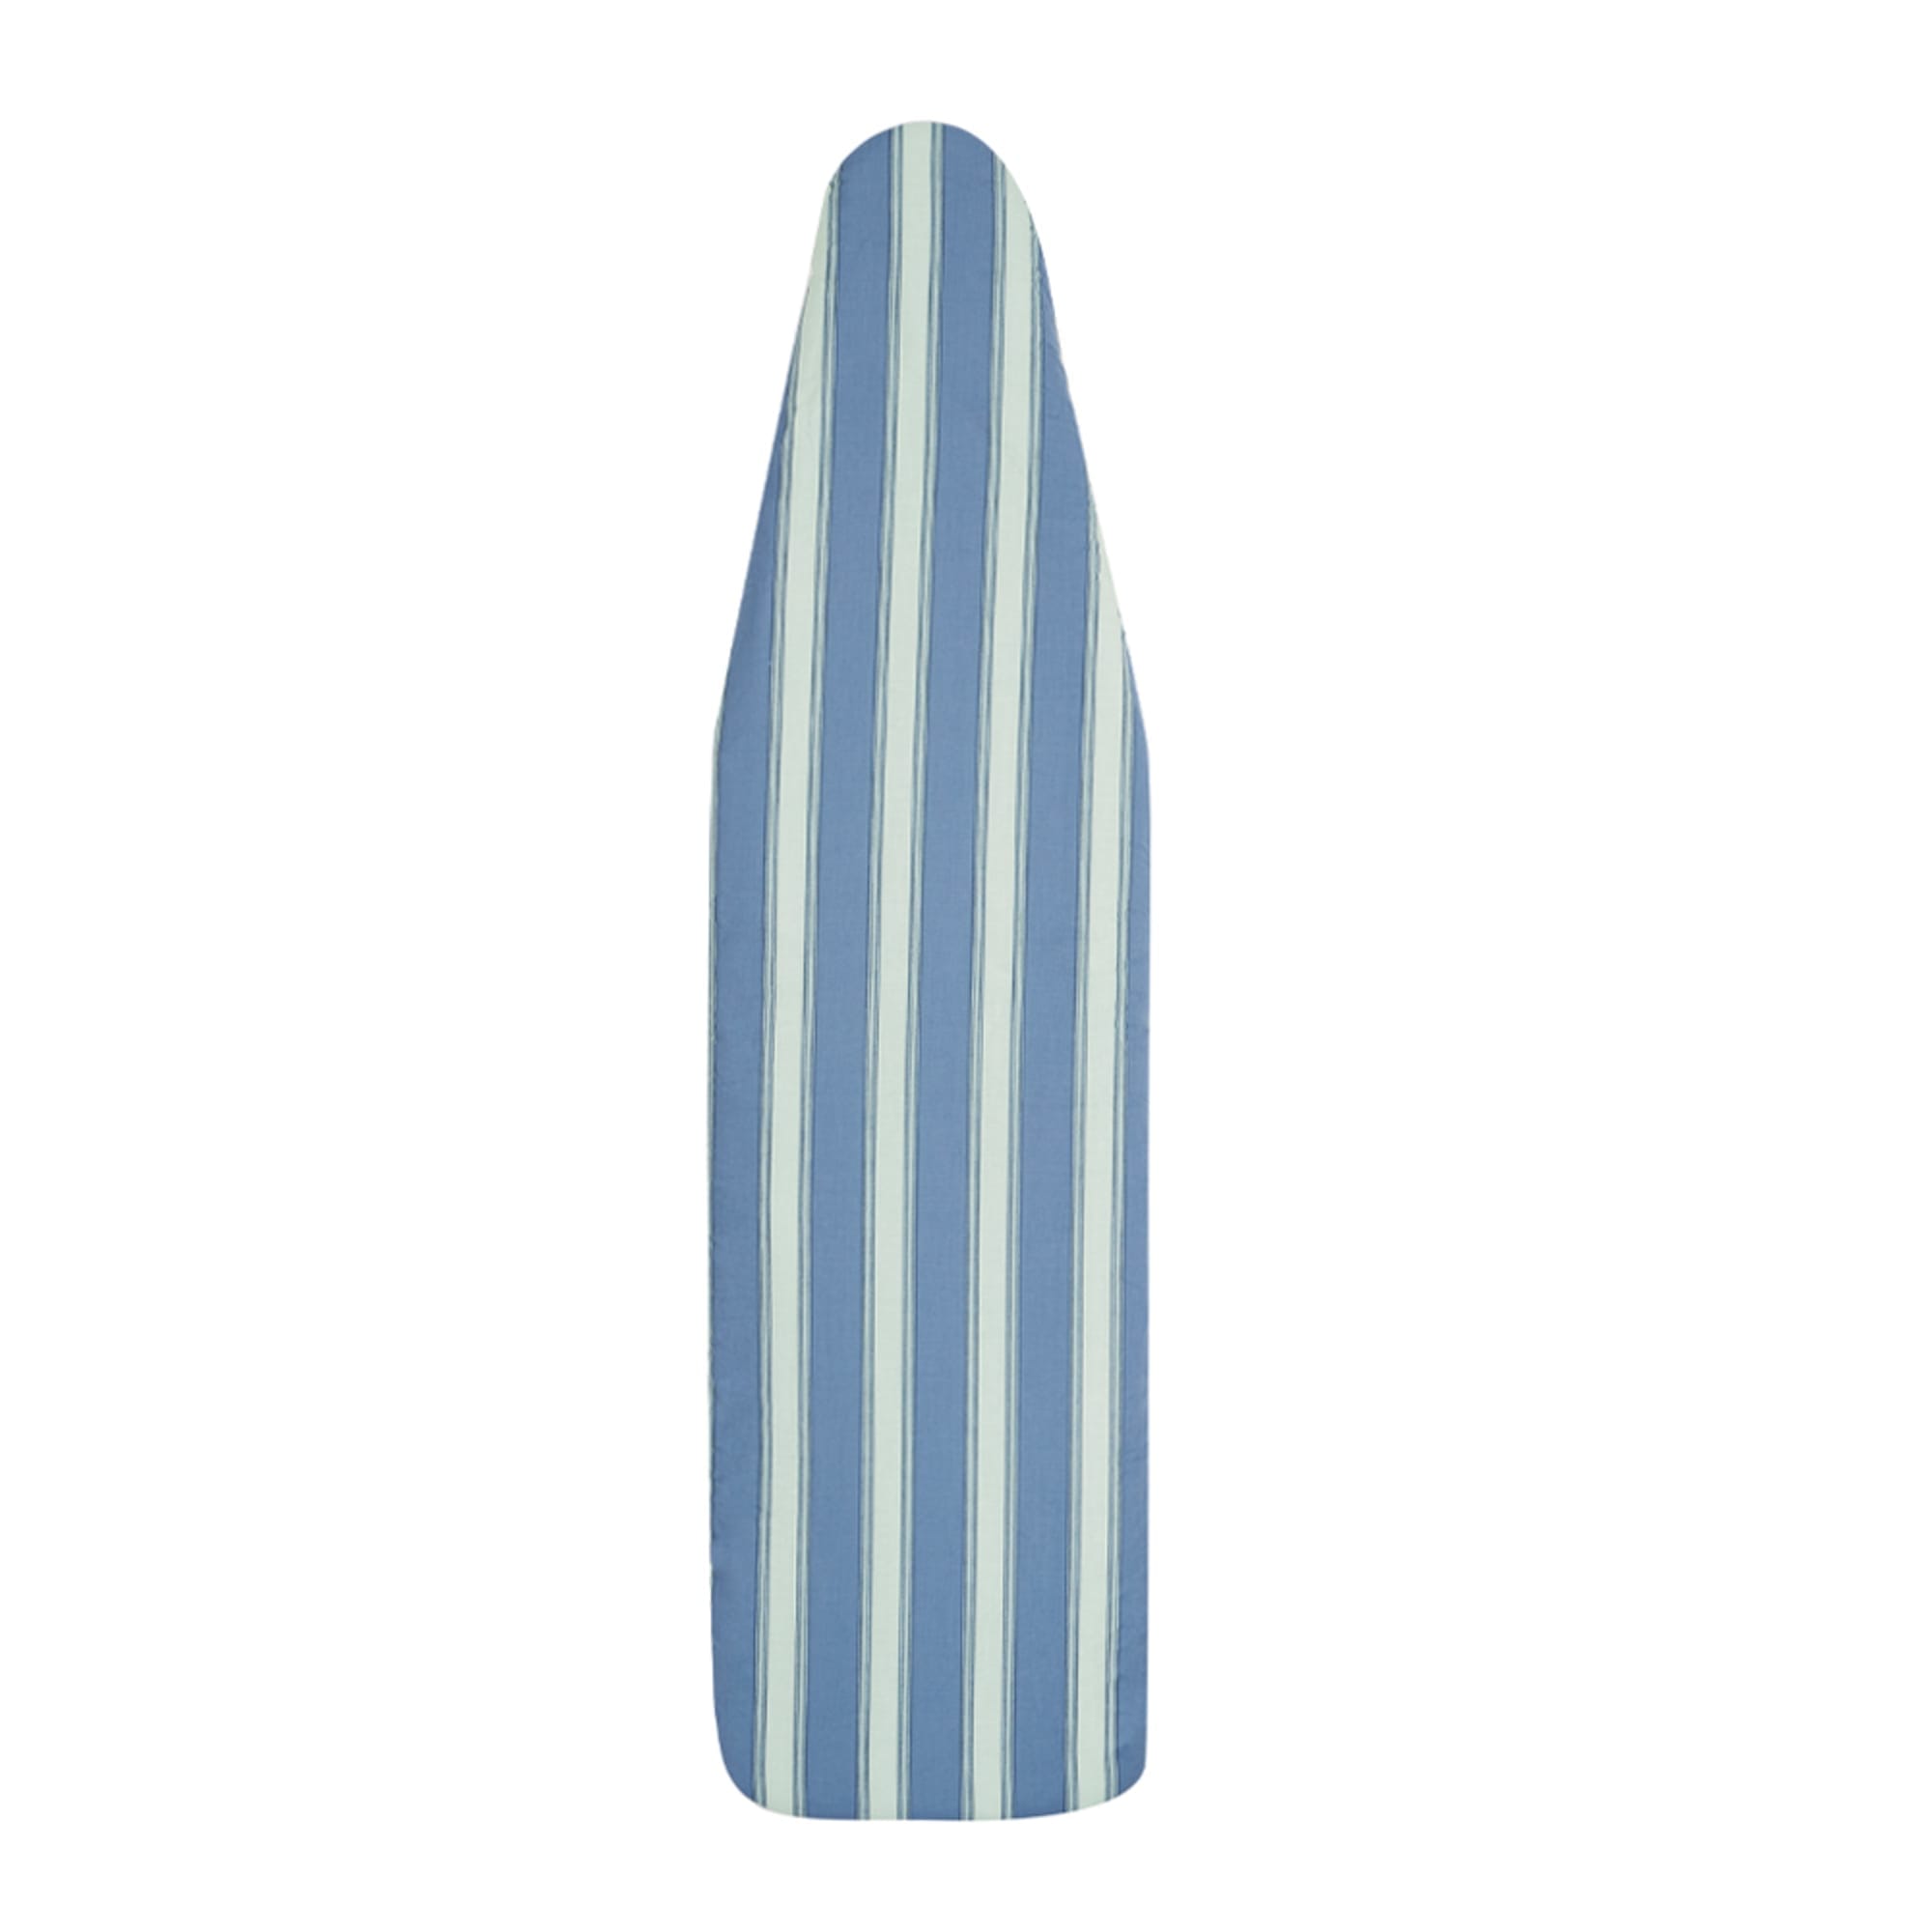 Seymour Home Products Ultimate Replacement Cover and Pad, Blue Green Neo Stripe, Fits 53"-54" X 13"-14" $10.00 EACH, CASE PACK OF 6